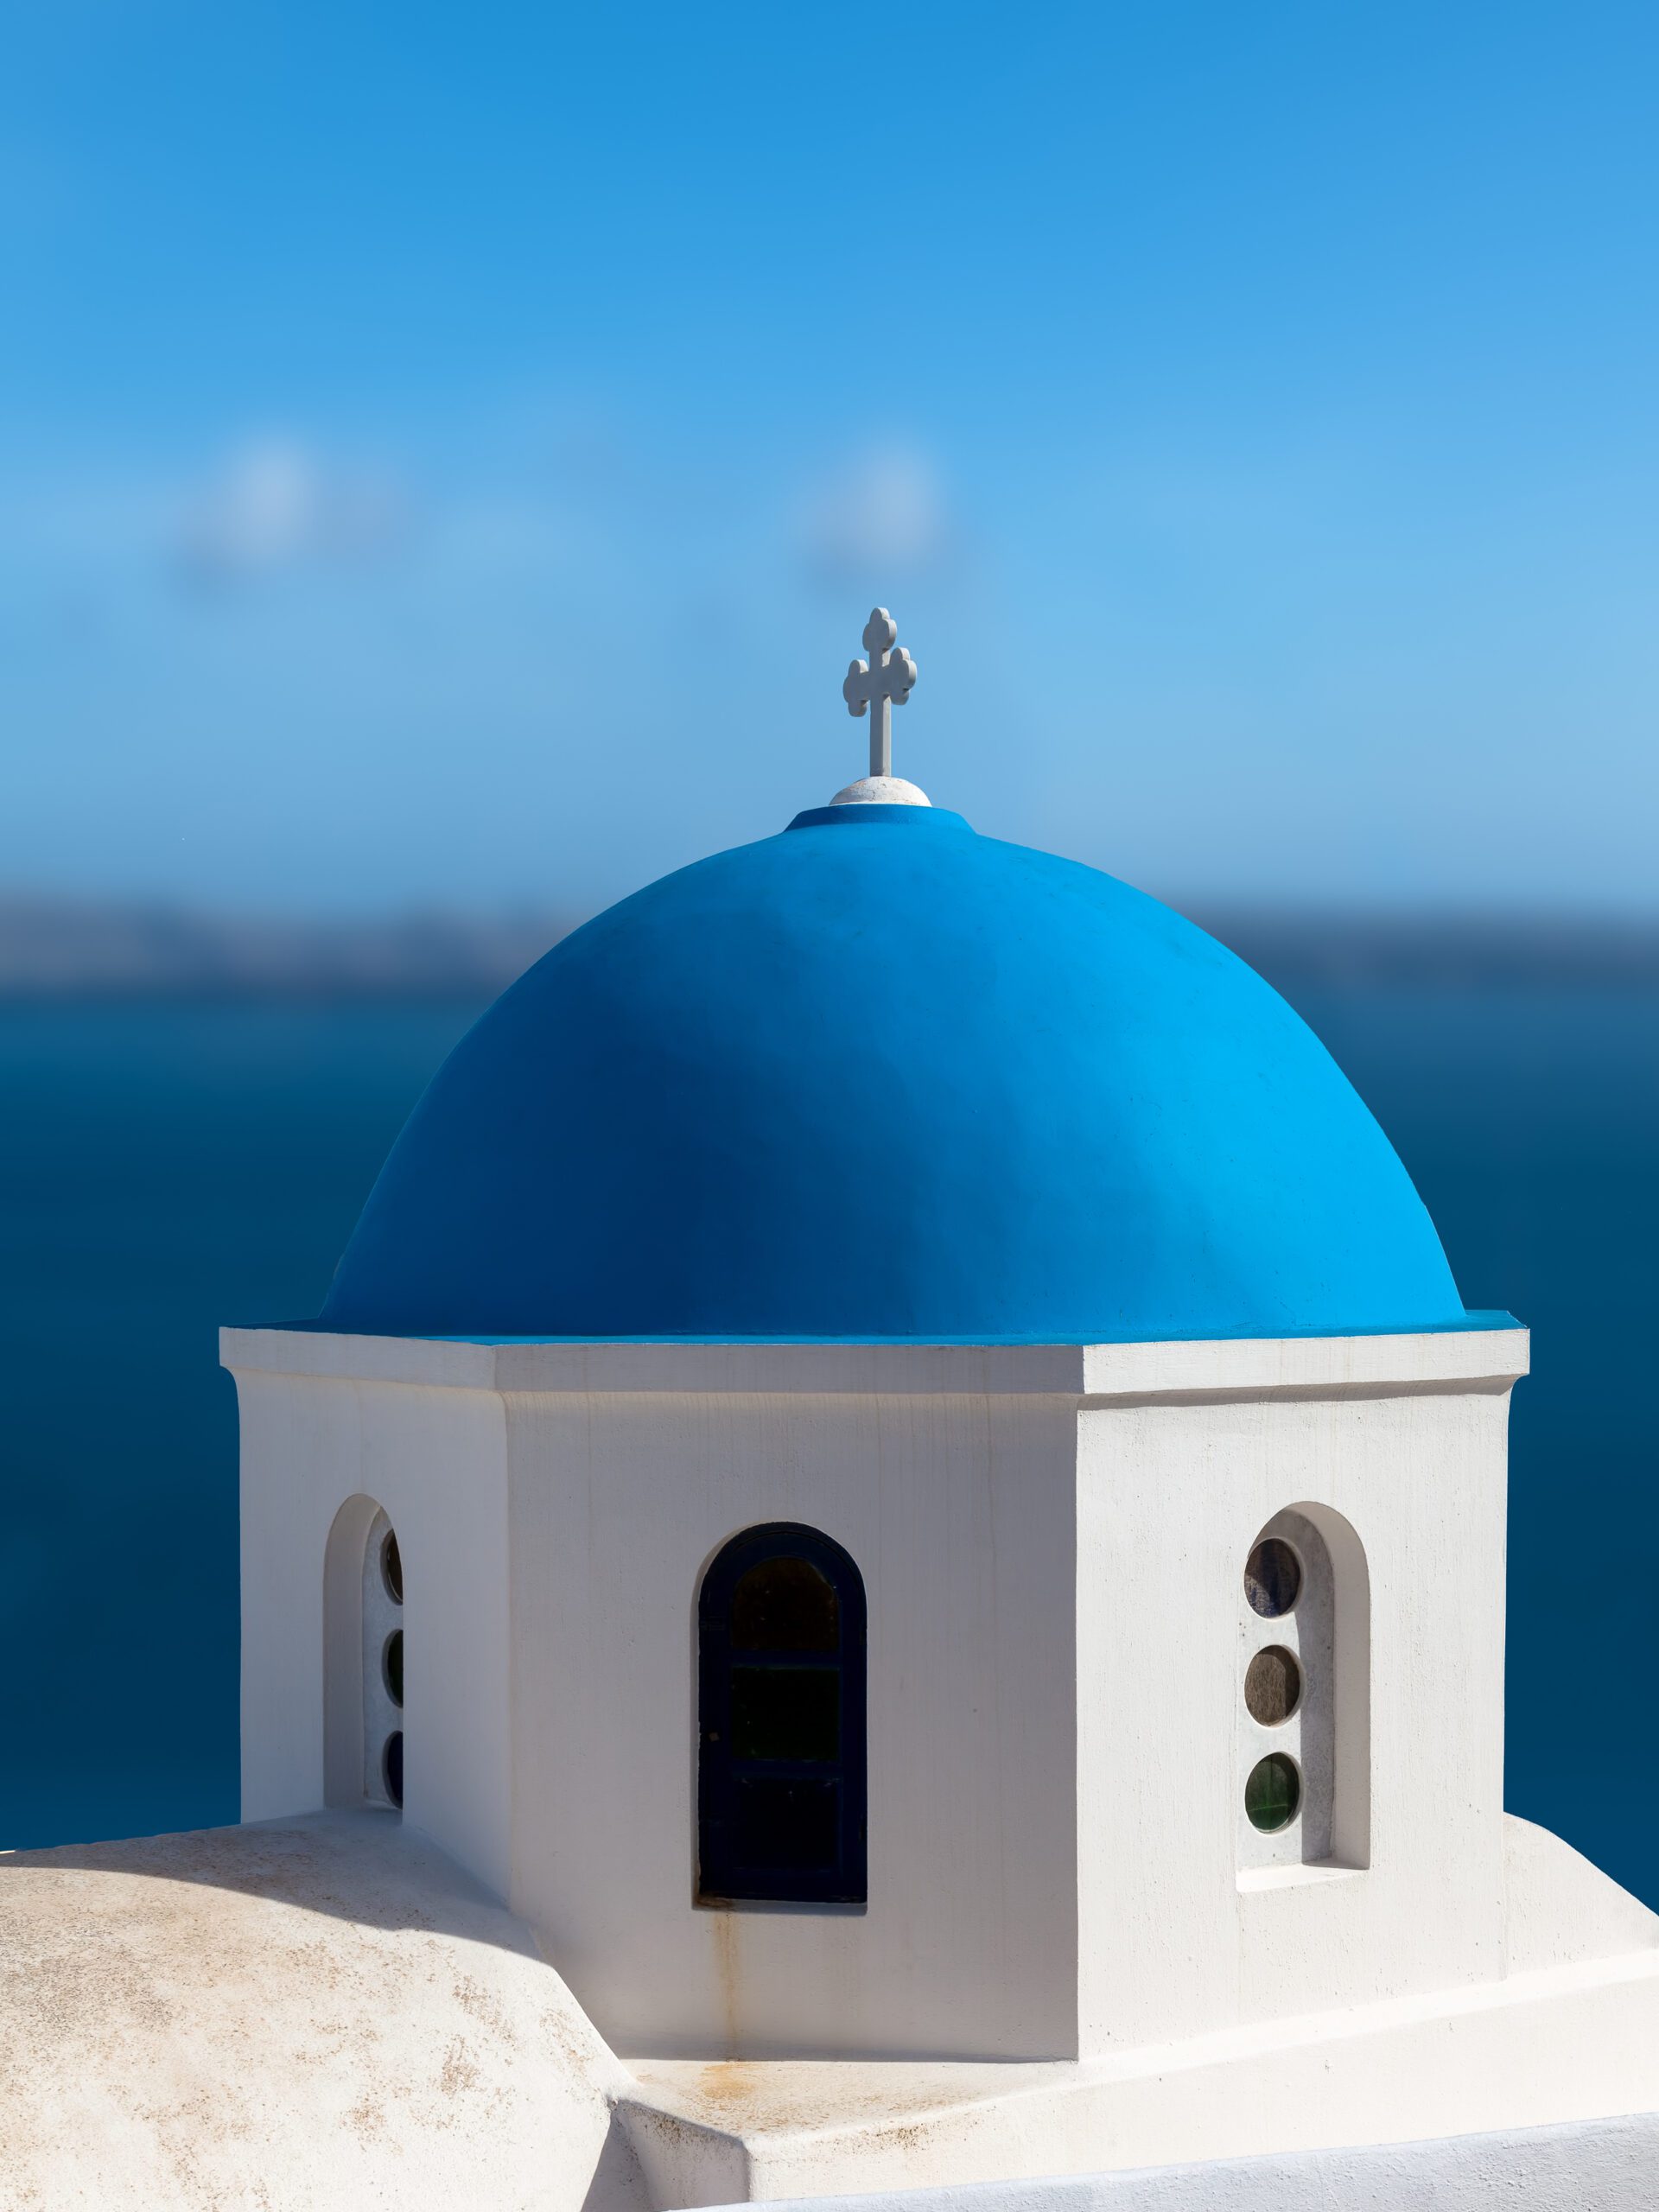 Blue domed church in Santorini overlooking the serene blue waters of the caldera.